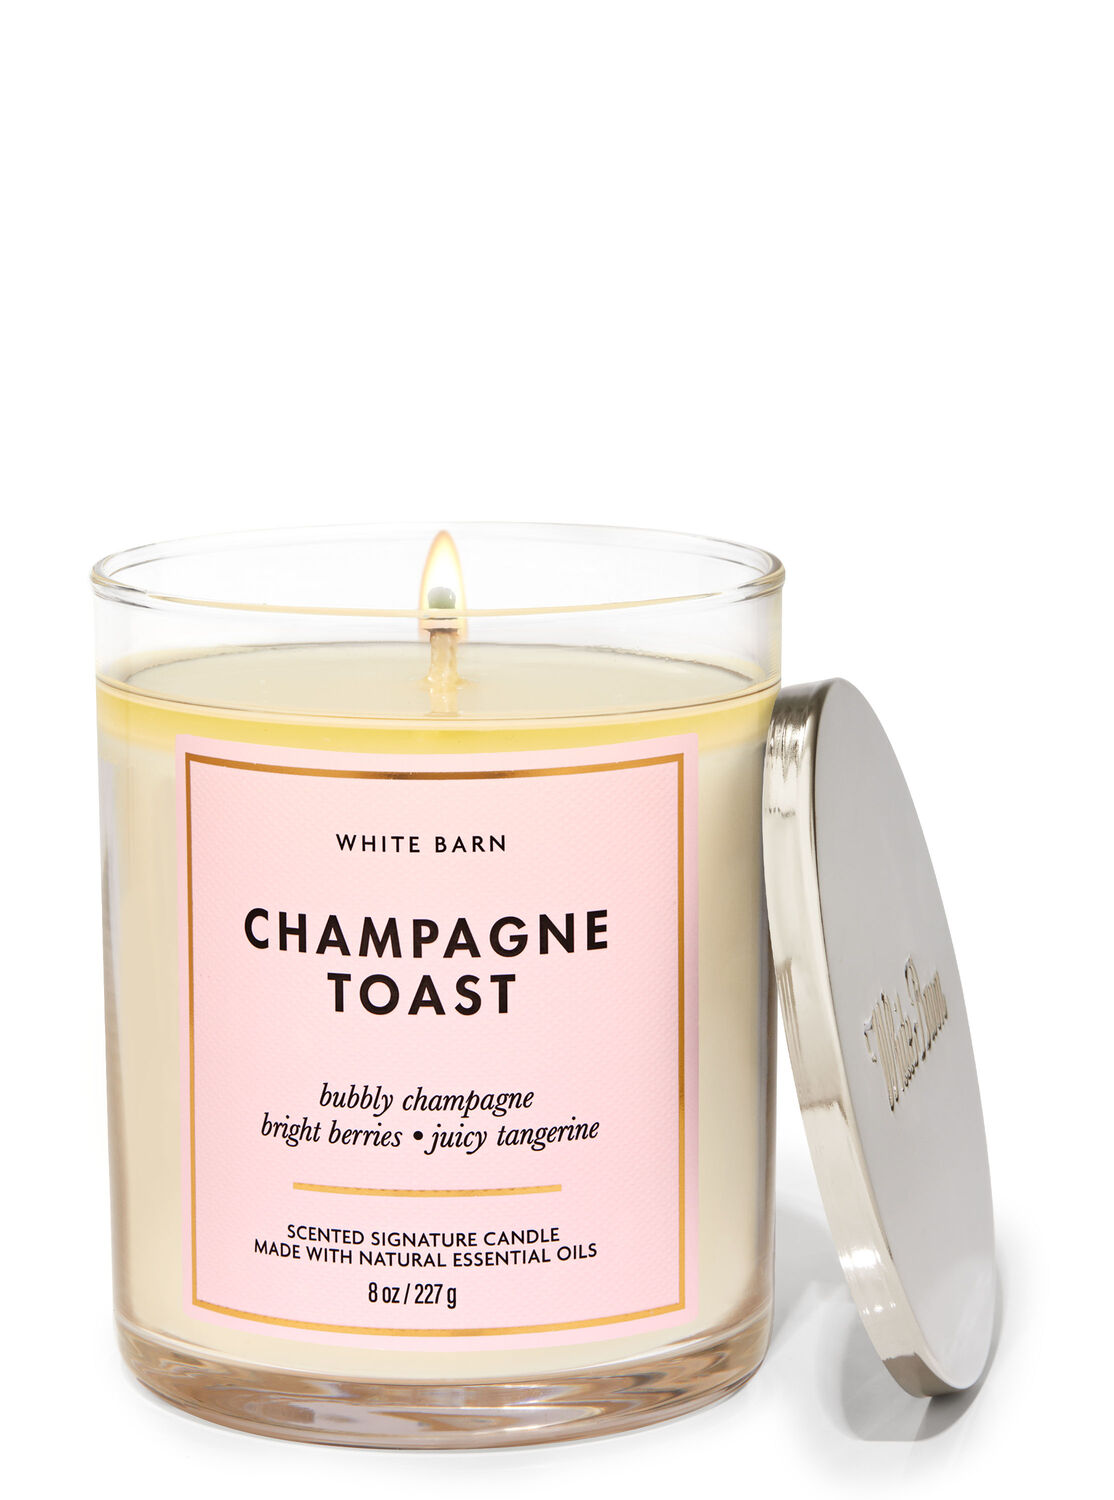 Champagne toast - 16oz Candles - Lite of my Life, Candle E-Commerce Shop